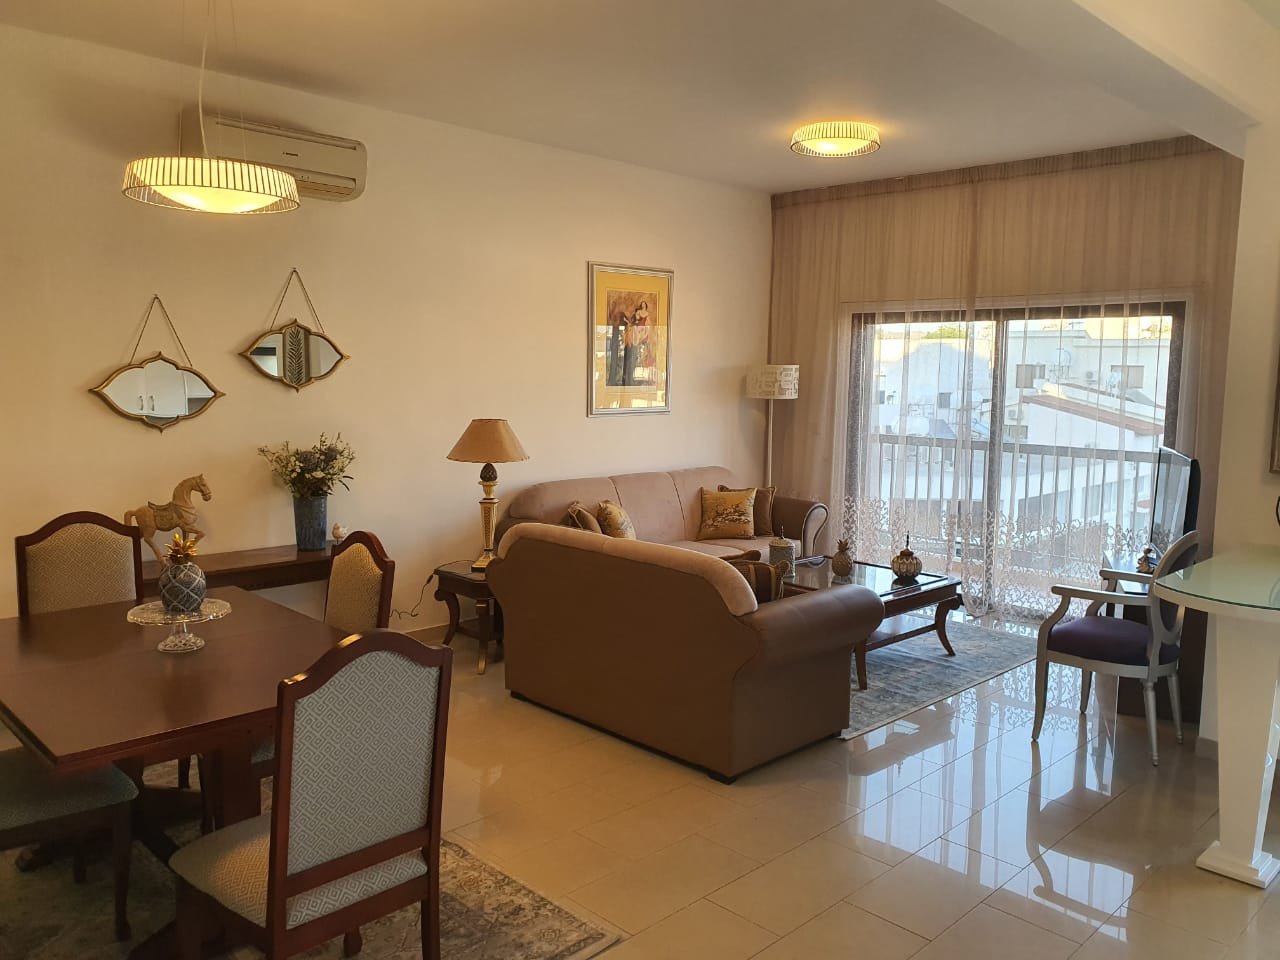 Property for Rent: Apartment (Flat) in City Center, Limassol for Rent | Key Realtor Cyprus